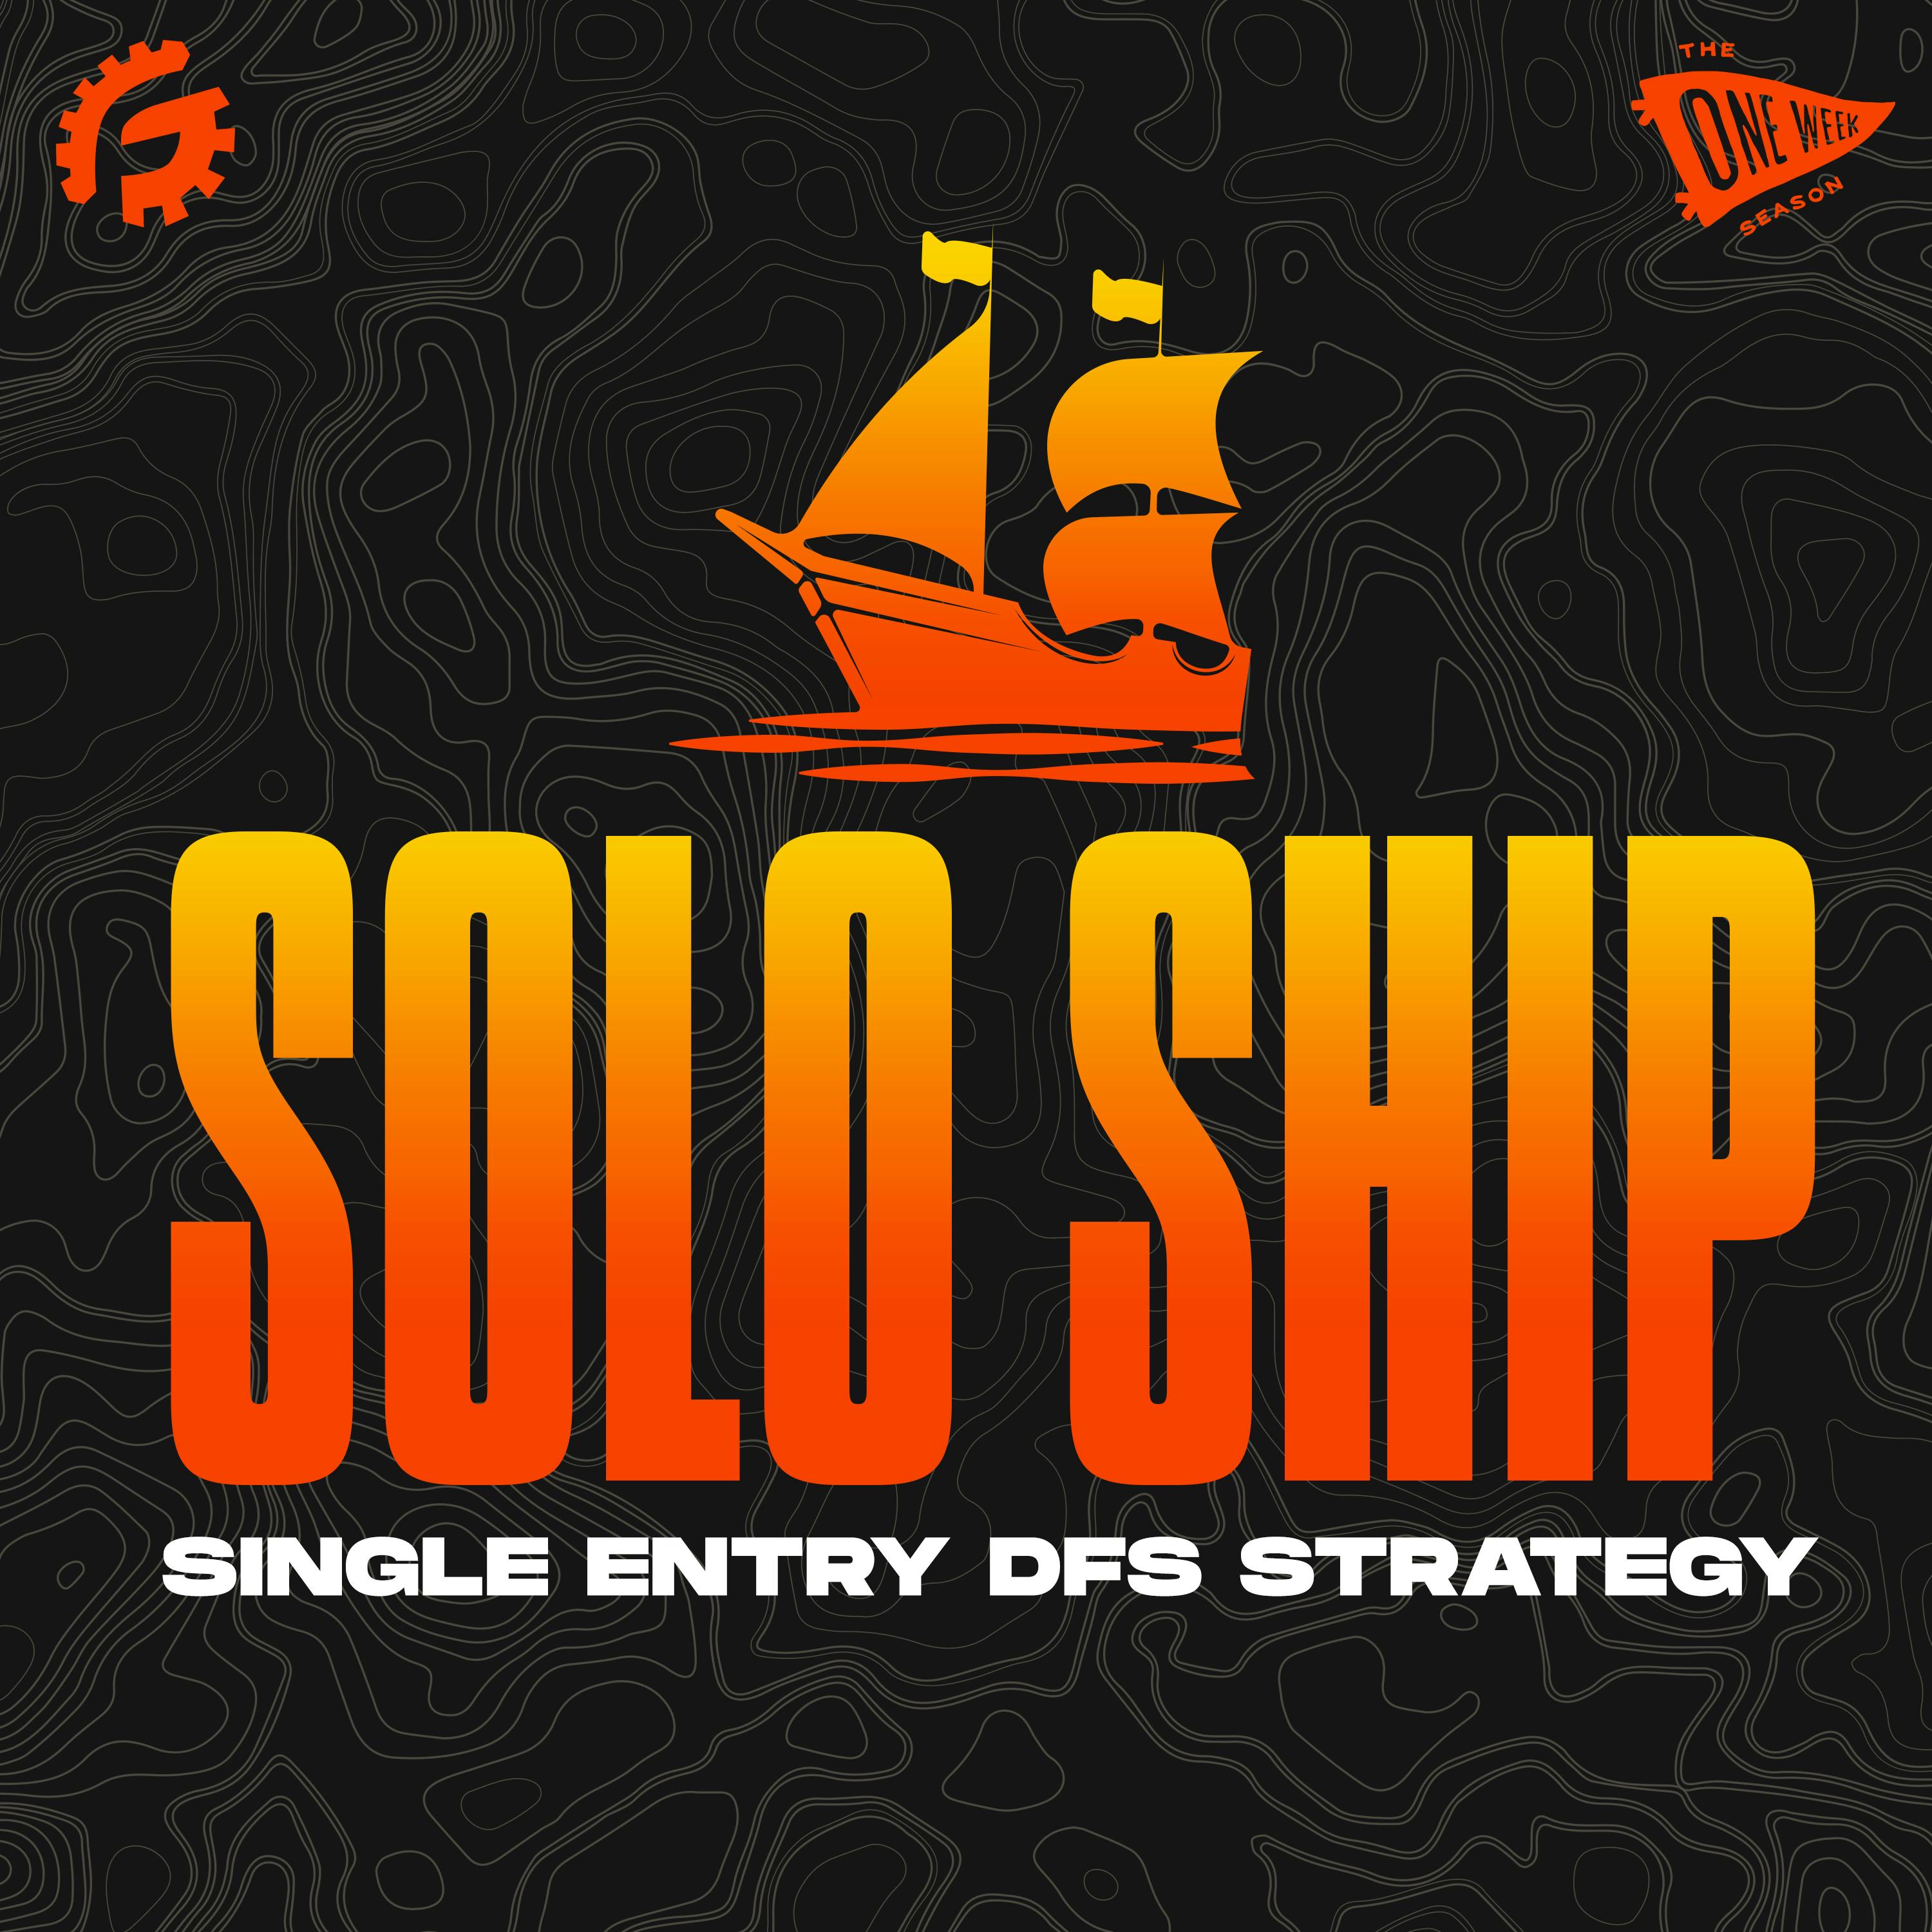 The NFL DFS Solo Ship Show - Week 6 Single Entry GPP Strategy with Squirrel and JMtoWin